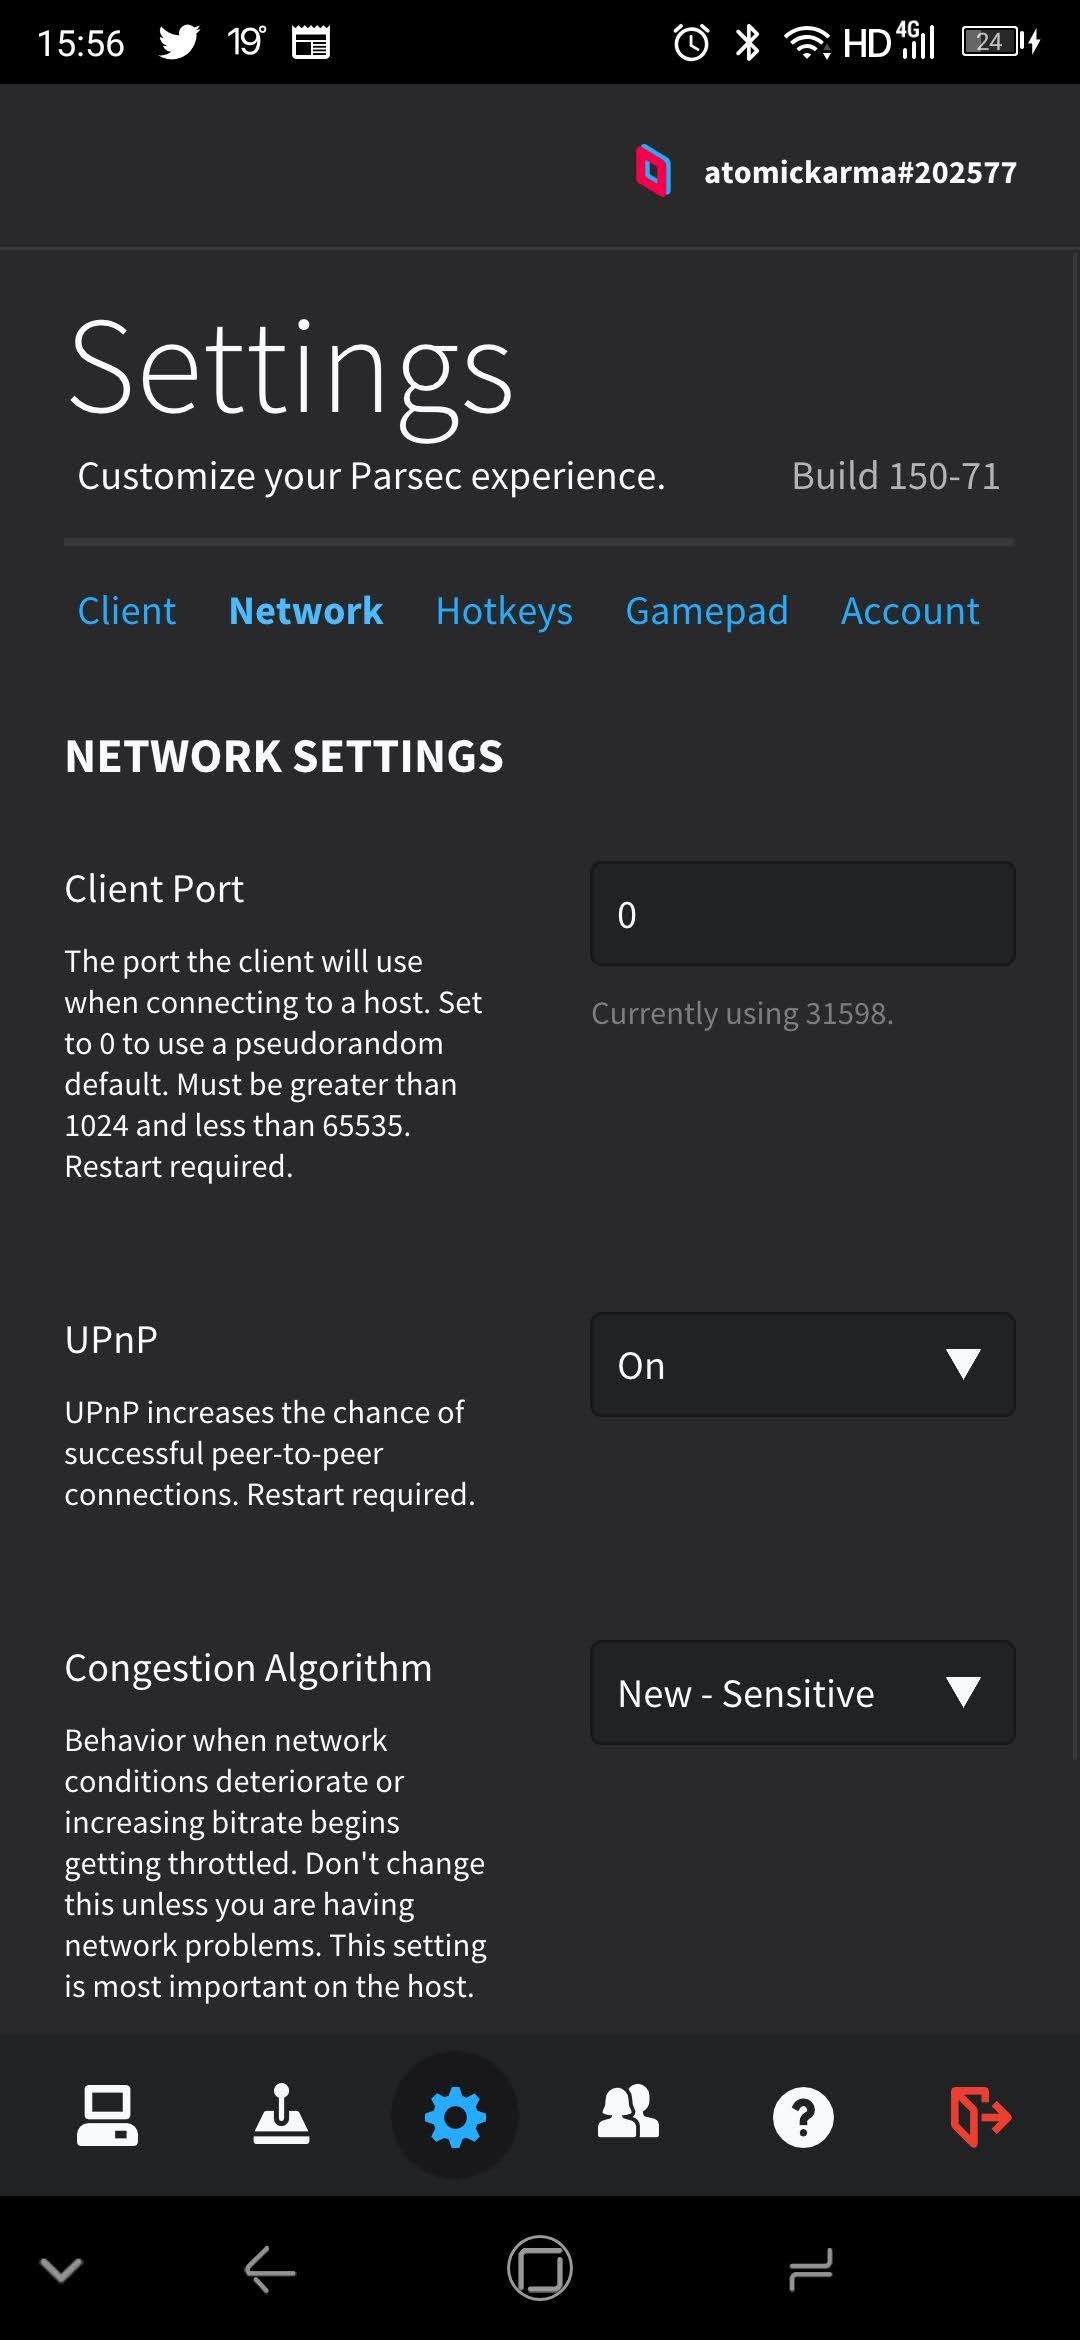 Configure network settings for streaming in Parsec